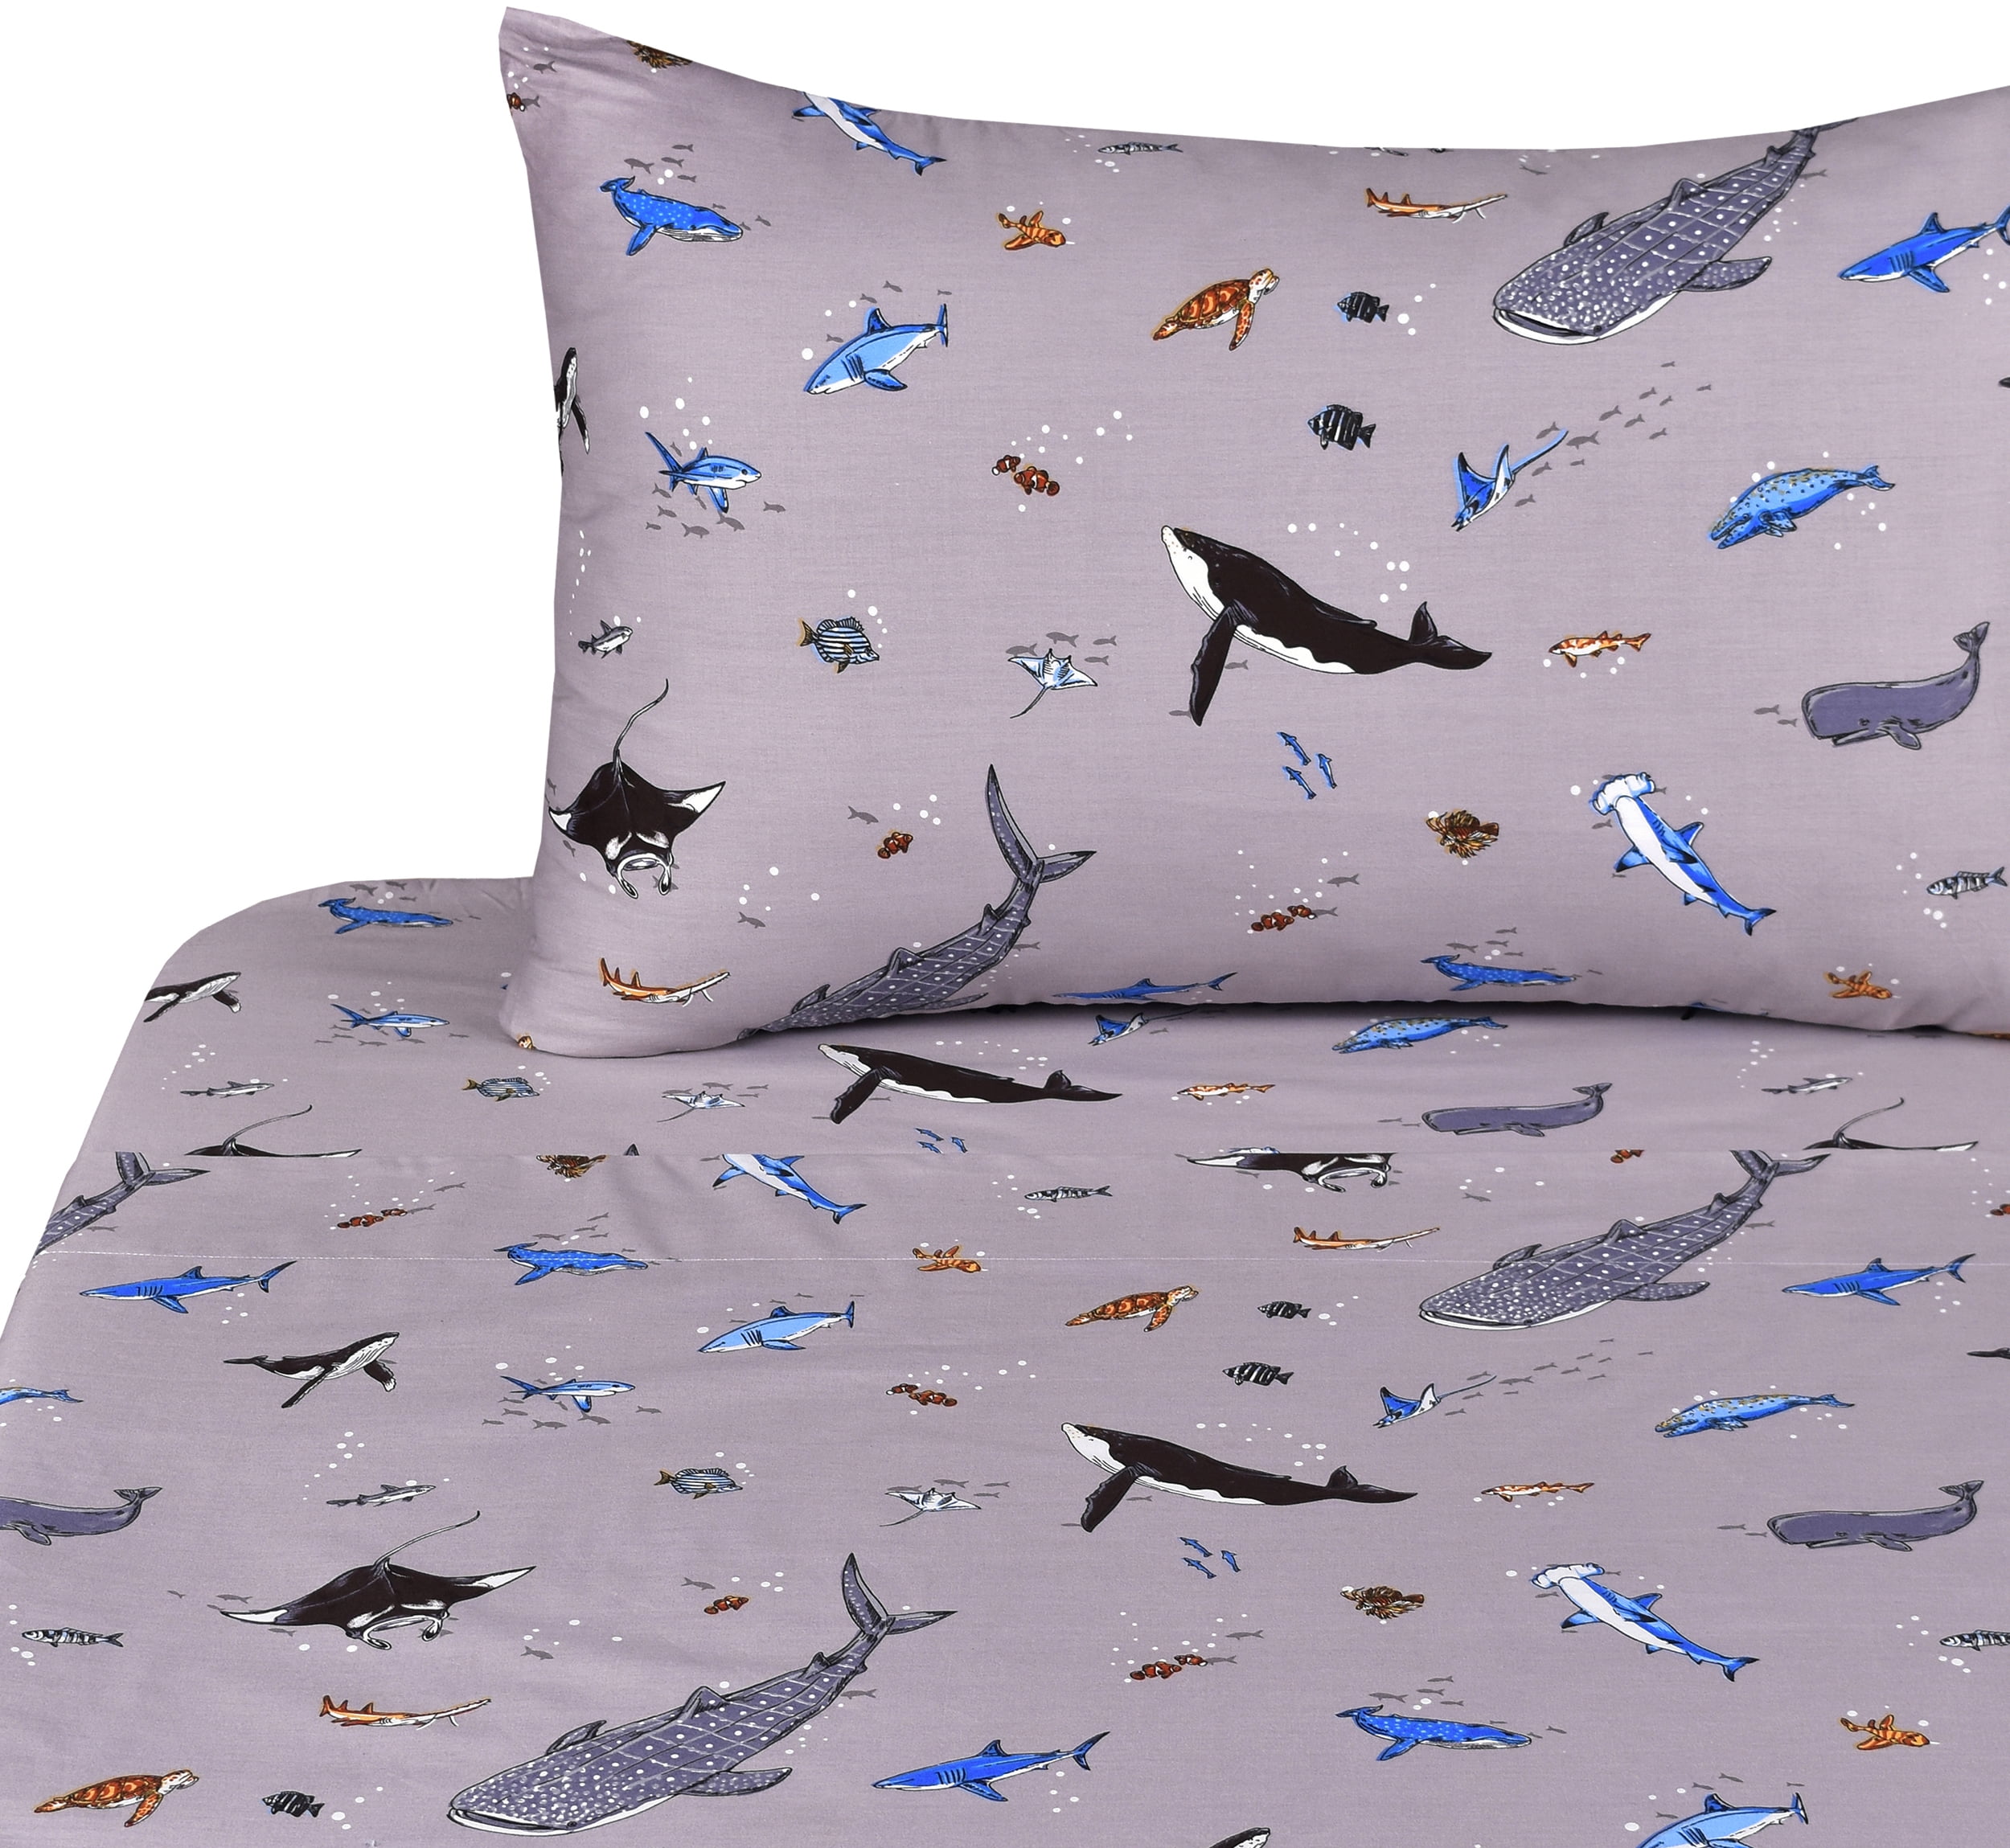 Details about   Max Studio Kid Shark TWIN Sheet Set Novelty Ocean Fish Red Green 100% Cotton NEW 